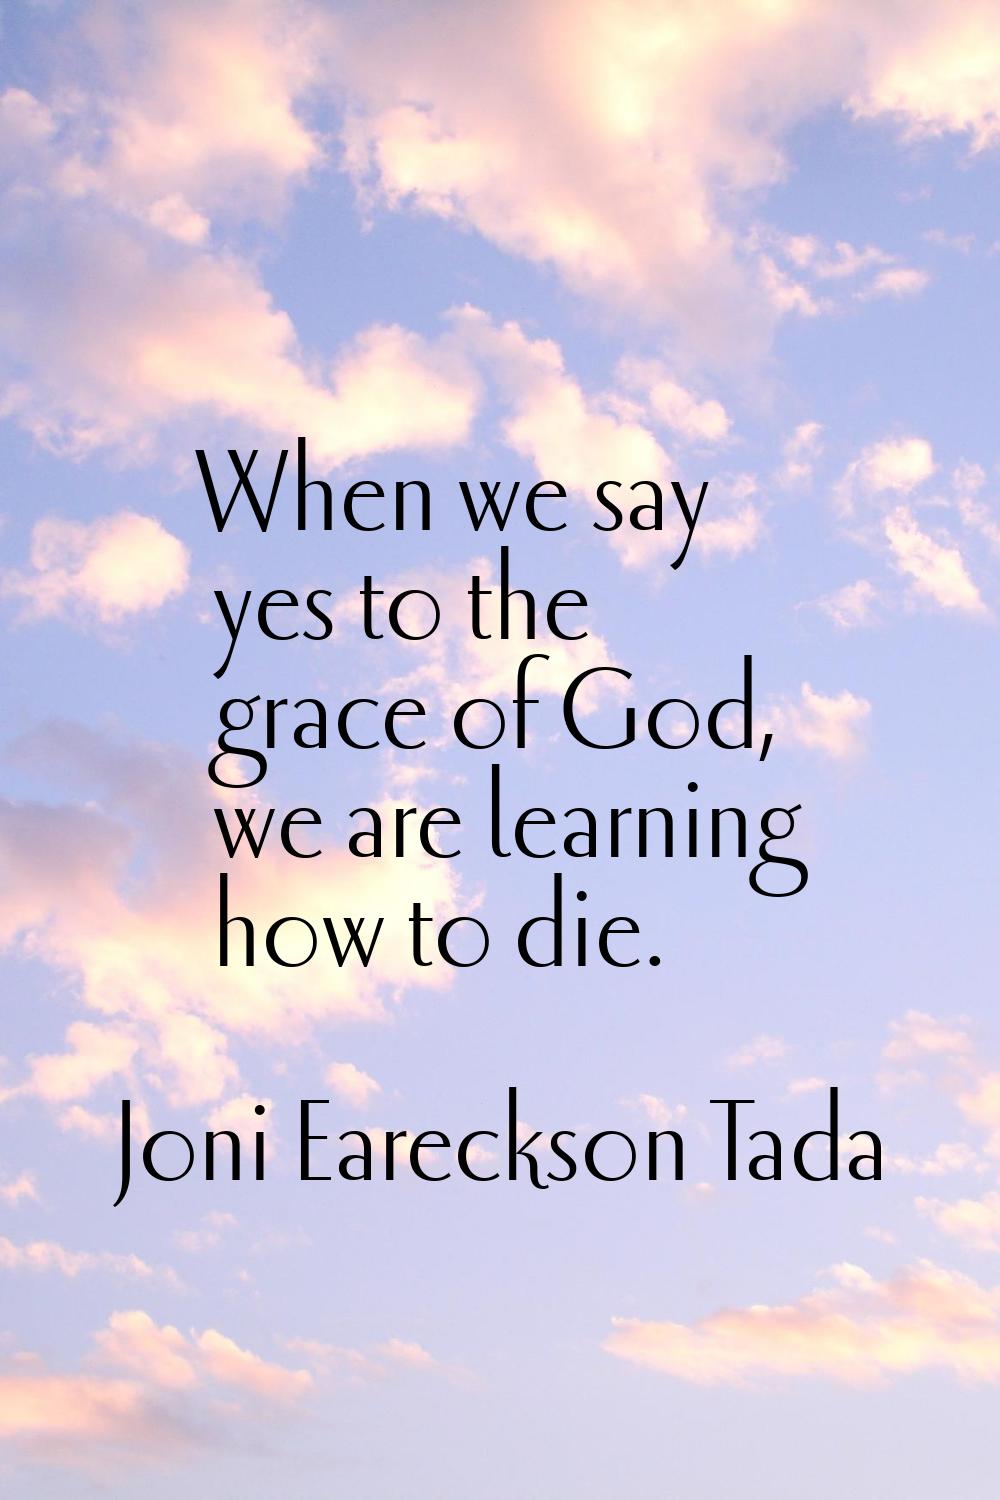 When we say yes to the grace of God, we are learning how to die.